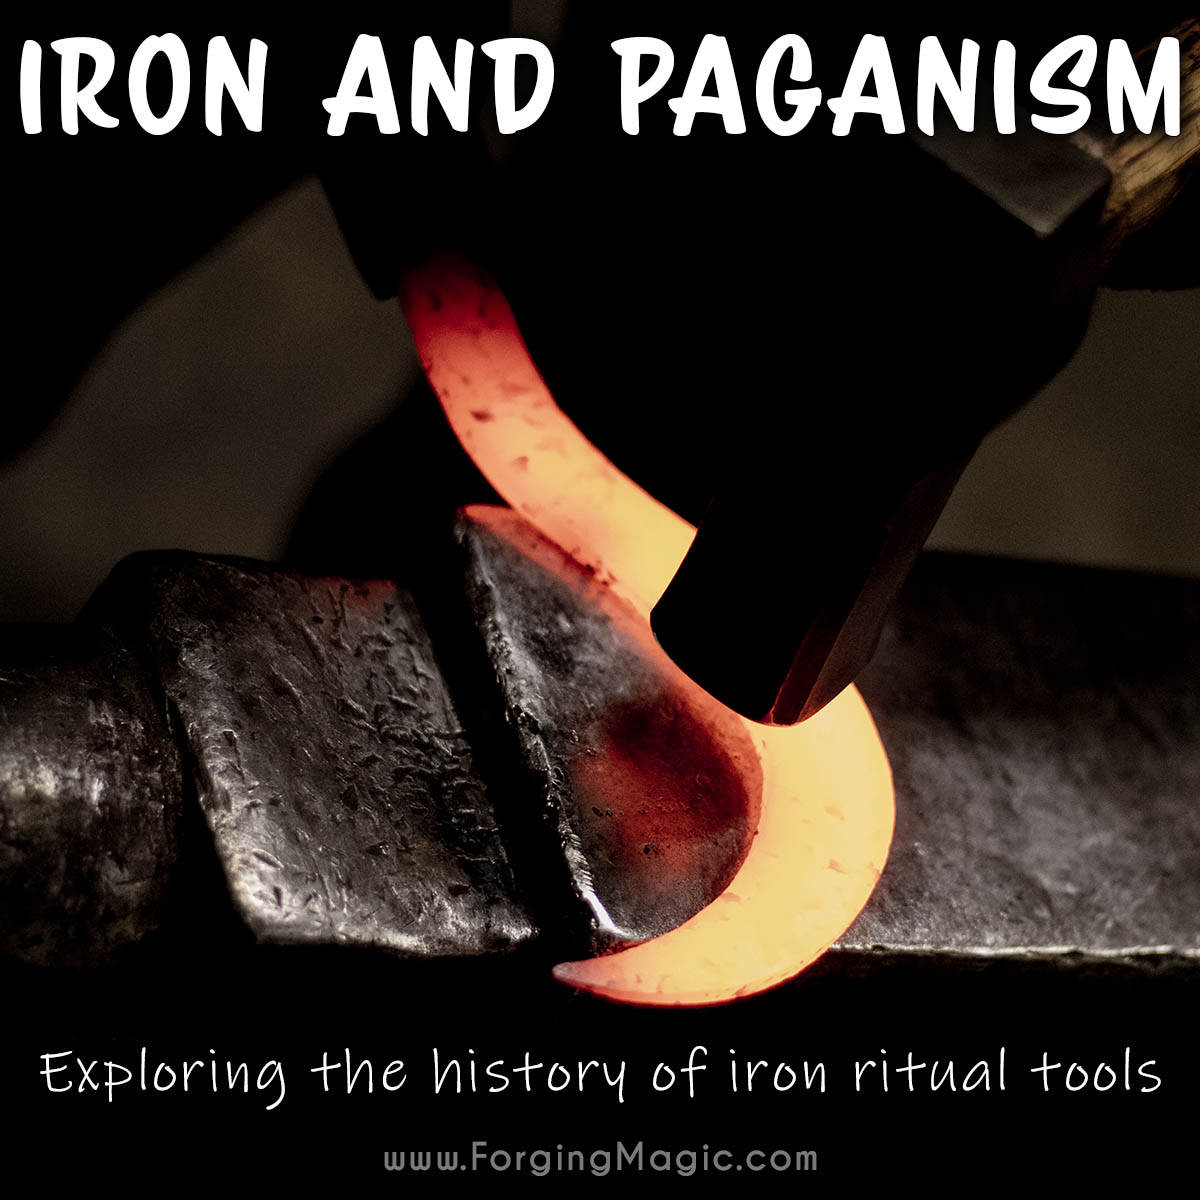 Iron and paganism, exploring the history of iron ritual tools and magick